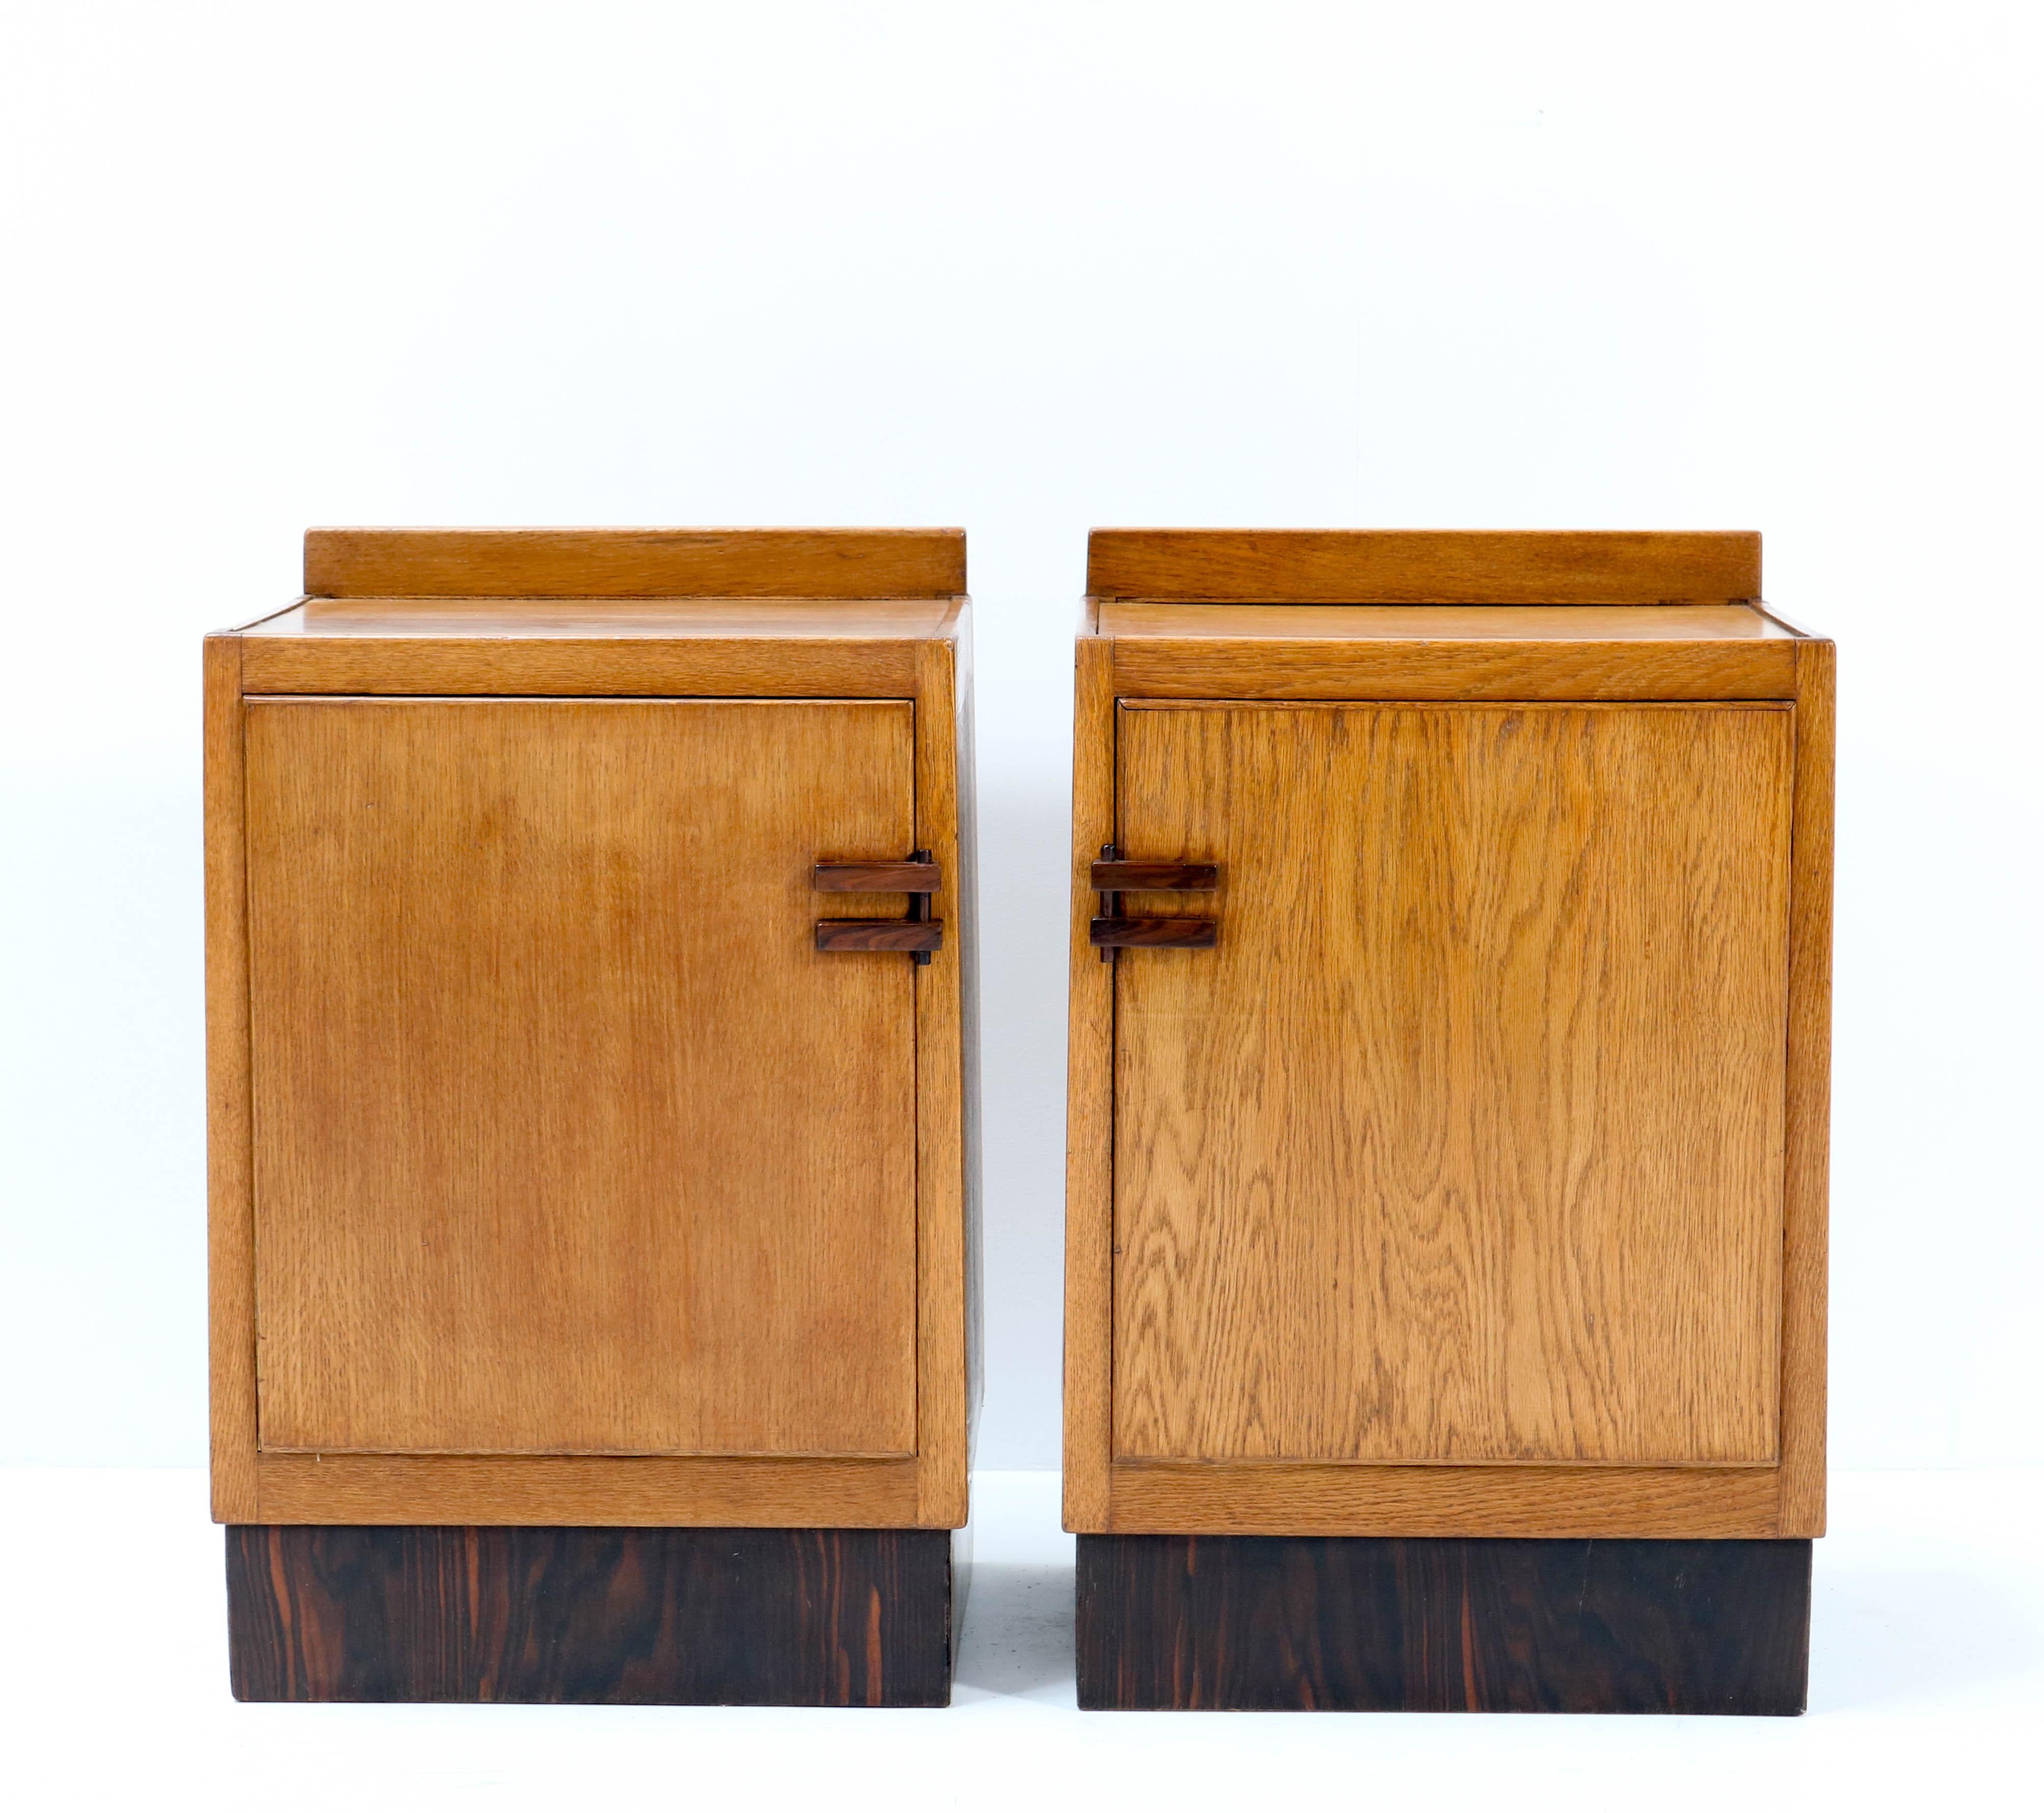 Wonderful pair of Art Deco Haagse School nightstands or bedside tables.
Striking Dutch design from the 1920s.
Solid oak with original oak veneer.
The handles are made of solid ebony Macassar.
In very good condition with a beautiful patina.